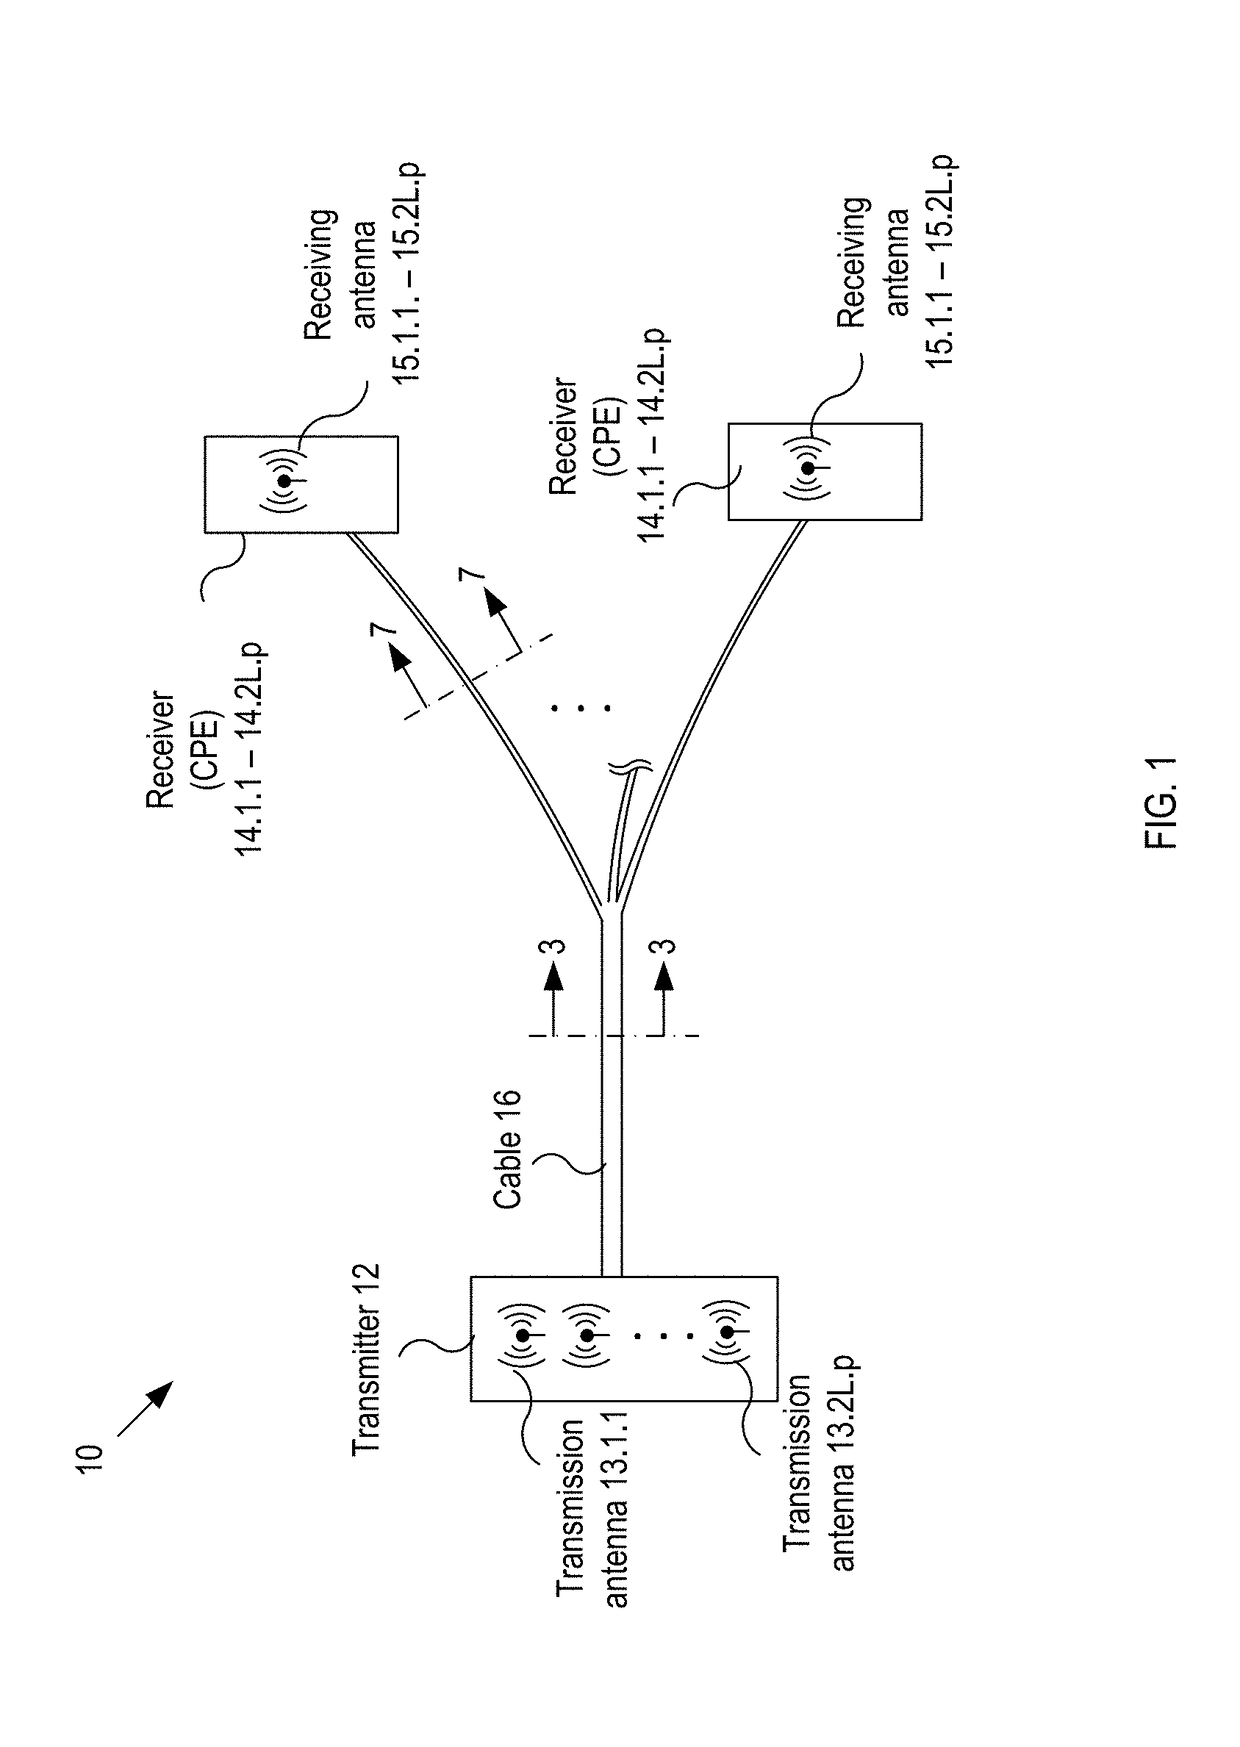 Systems and methods for implementing high-speed waveguide transmission over wires